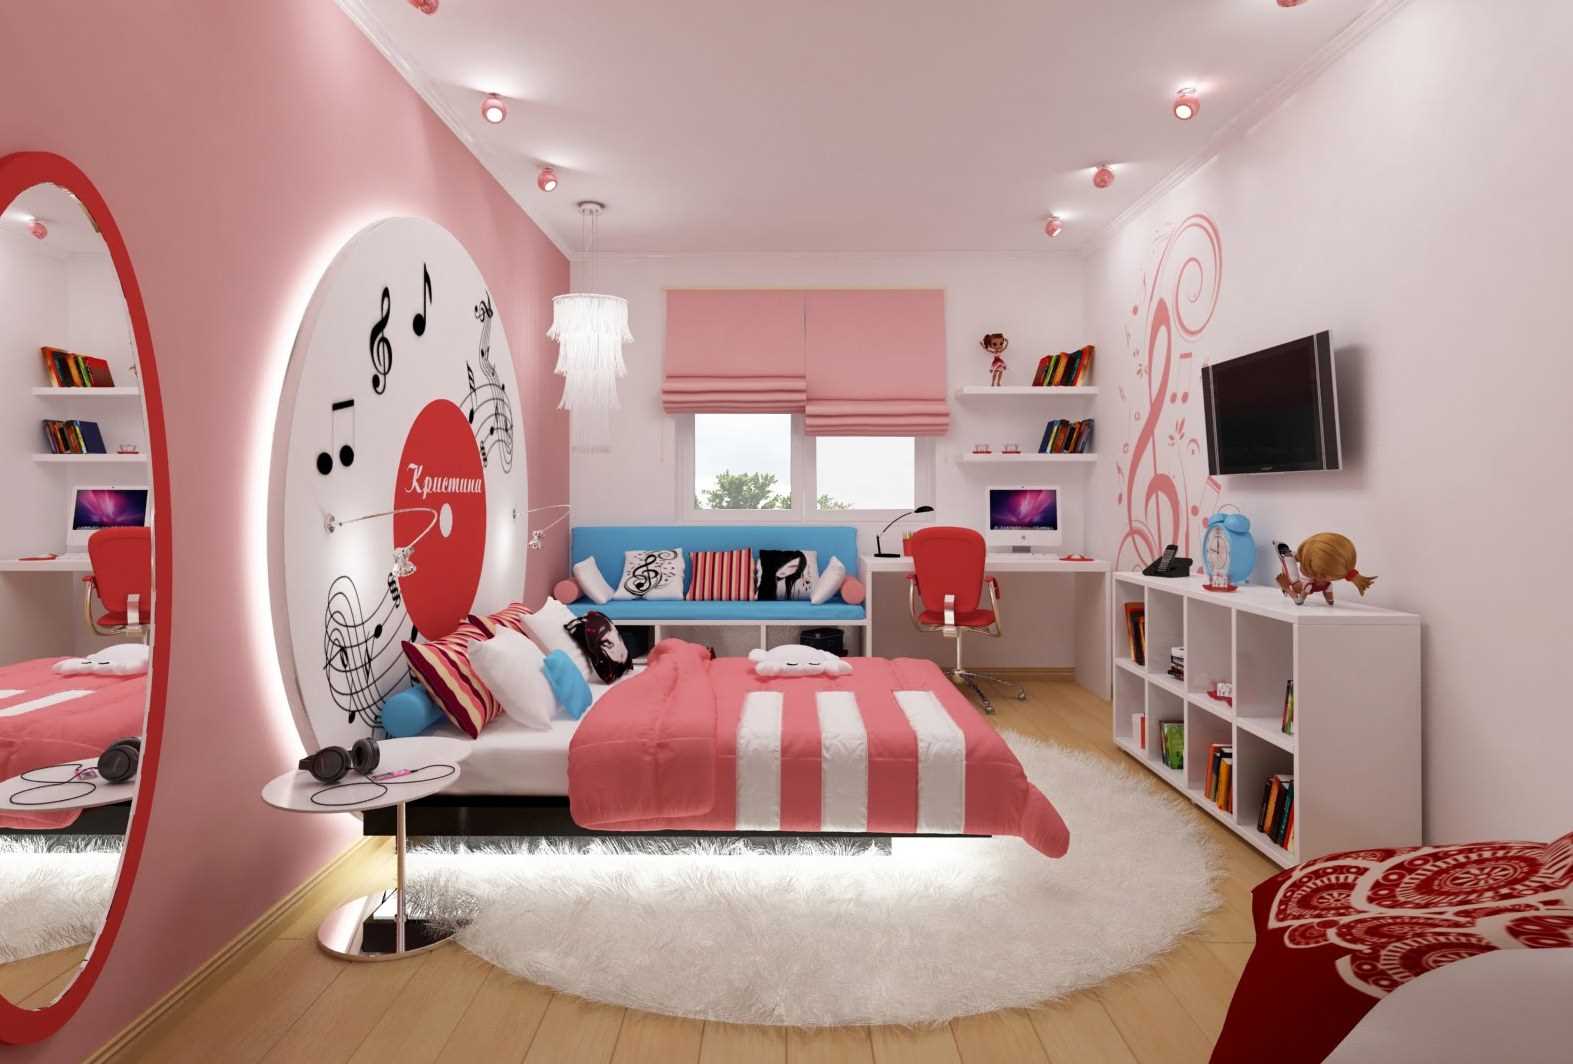 variant of a beautiful bedroom style for a girl in a modern style